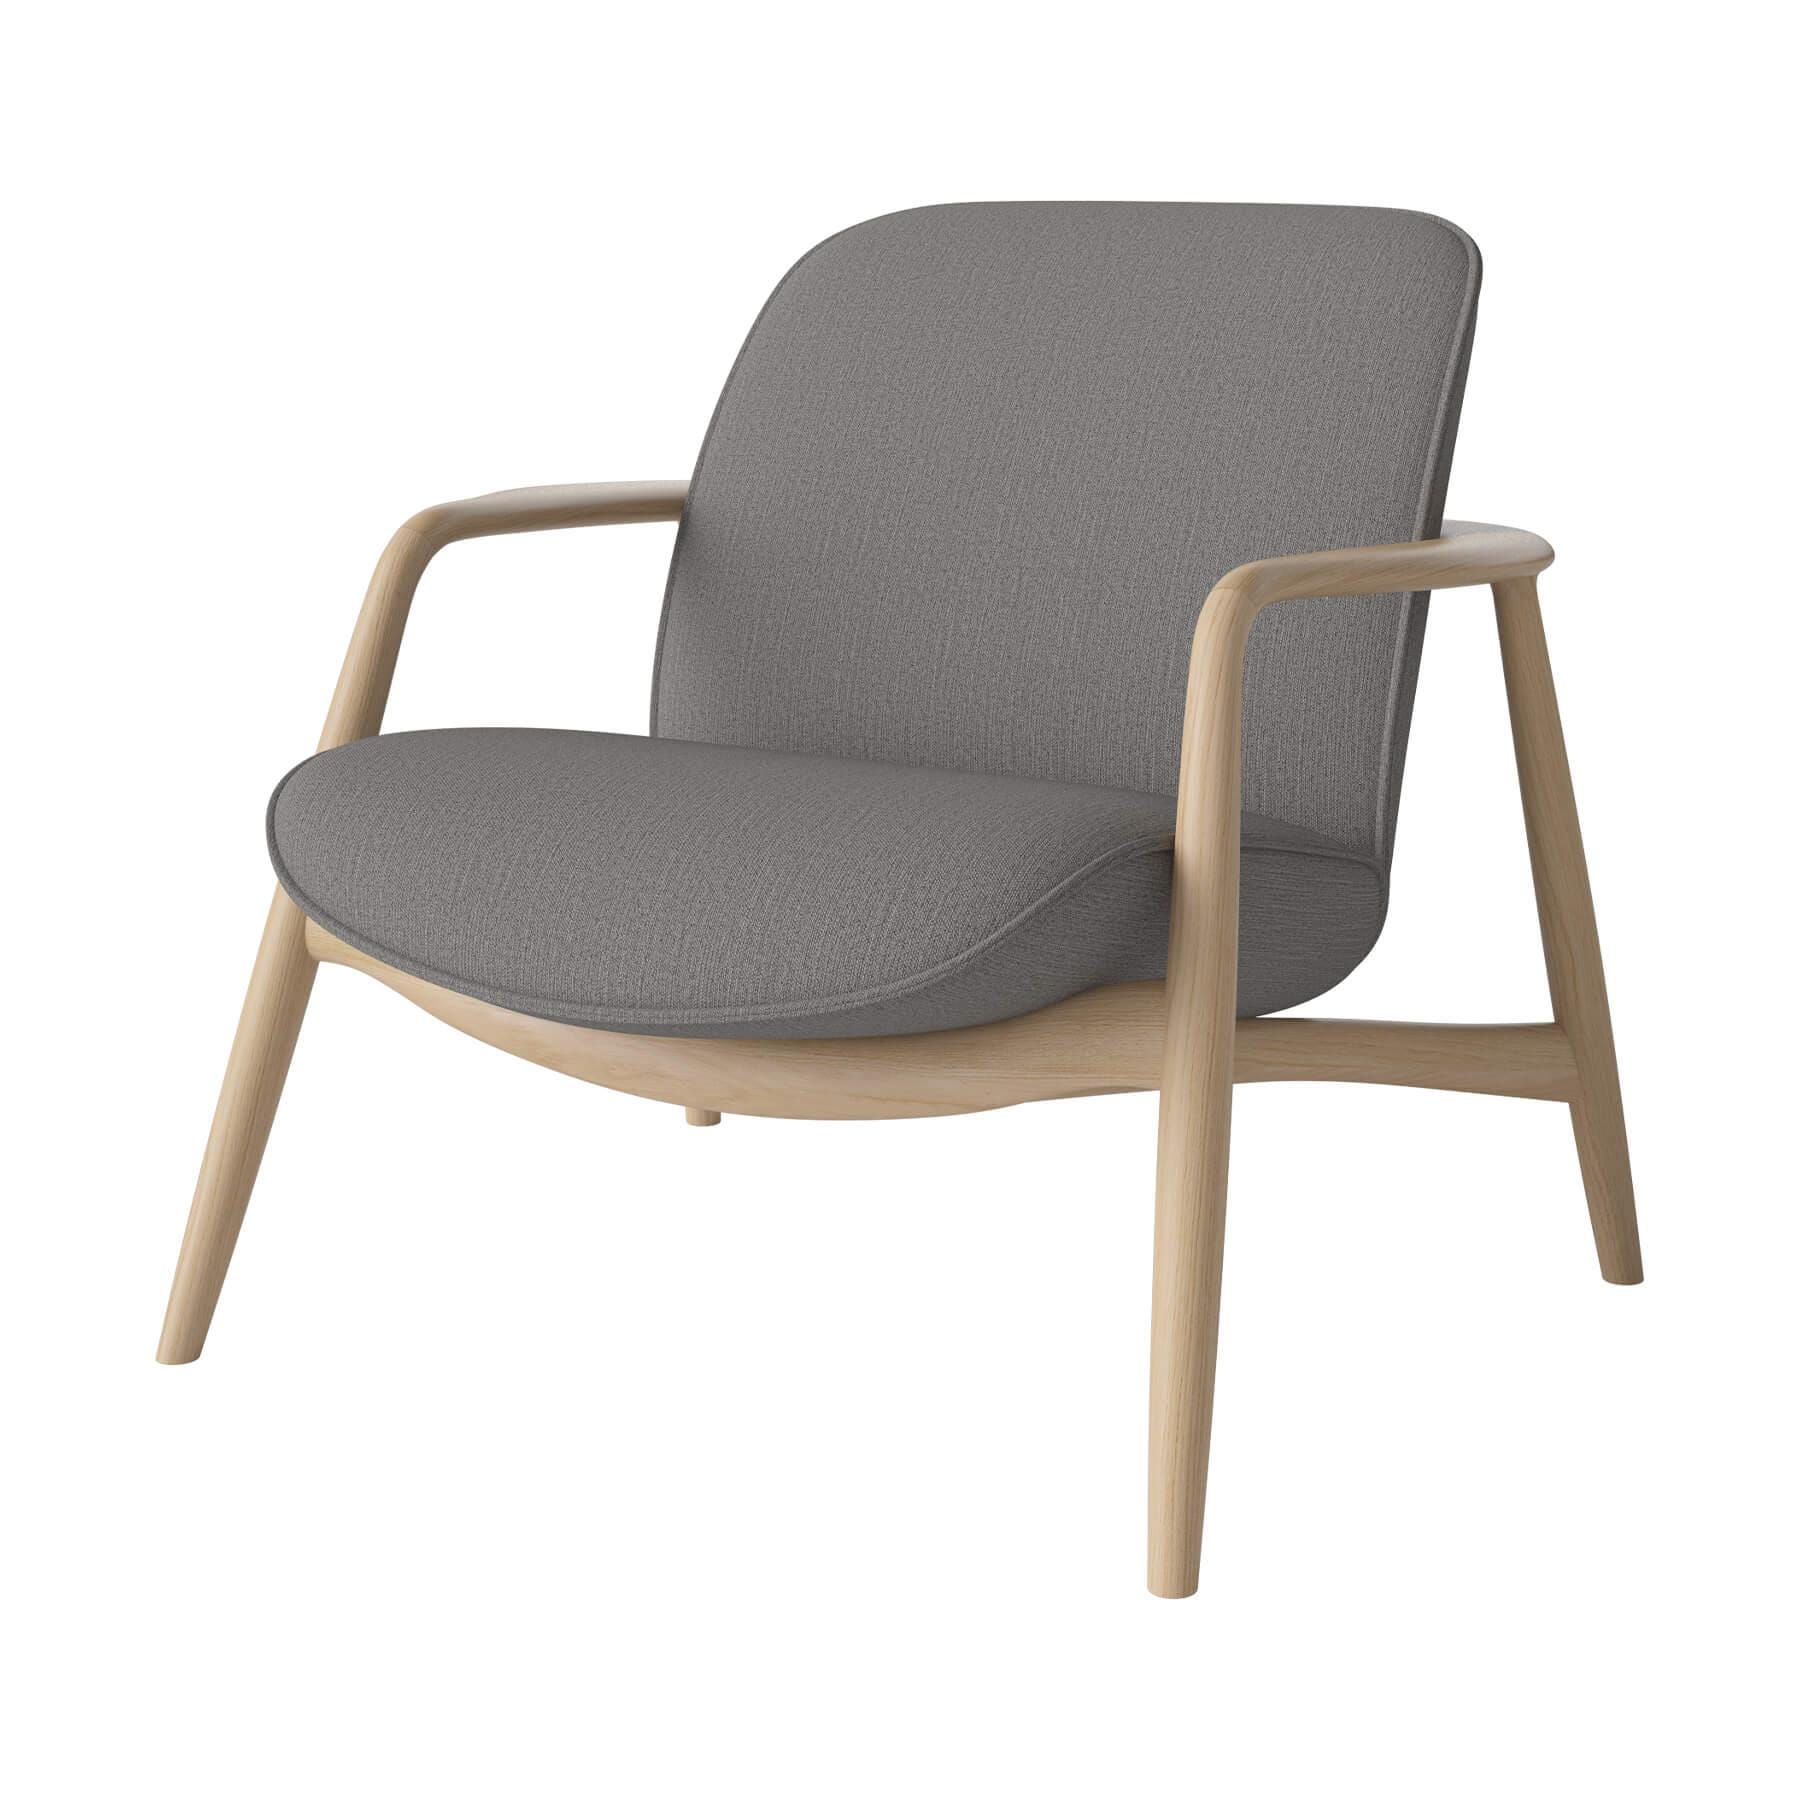 Bolia Bowie Armchair White Oiled Oak Baize Steel Grey Designer Furniture From Holloways Of Ludlow